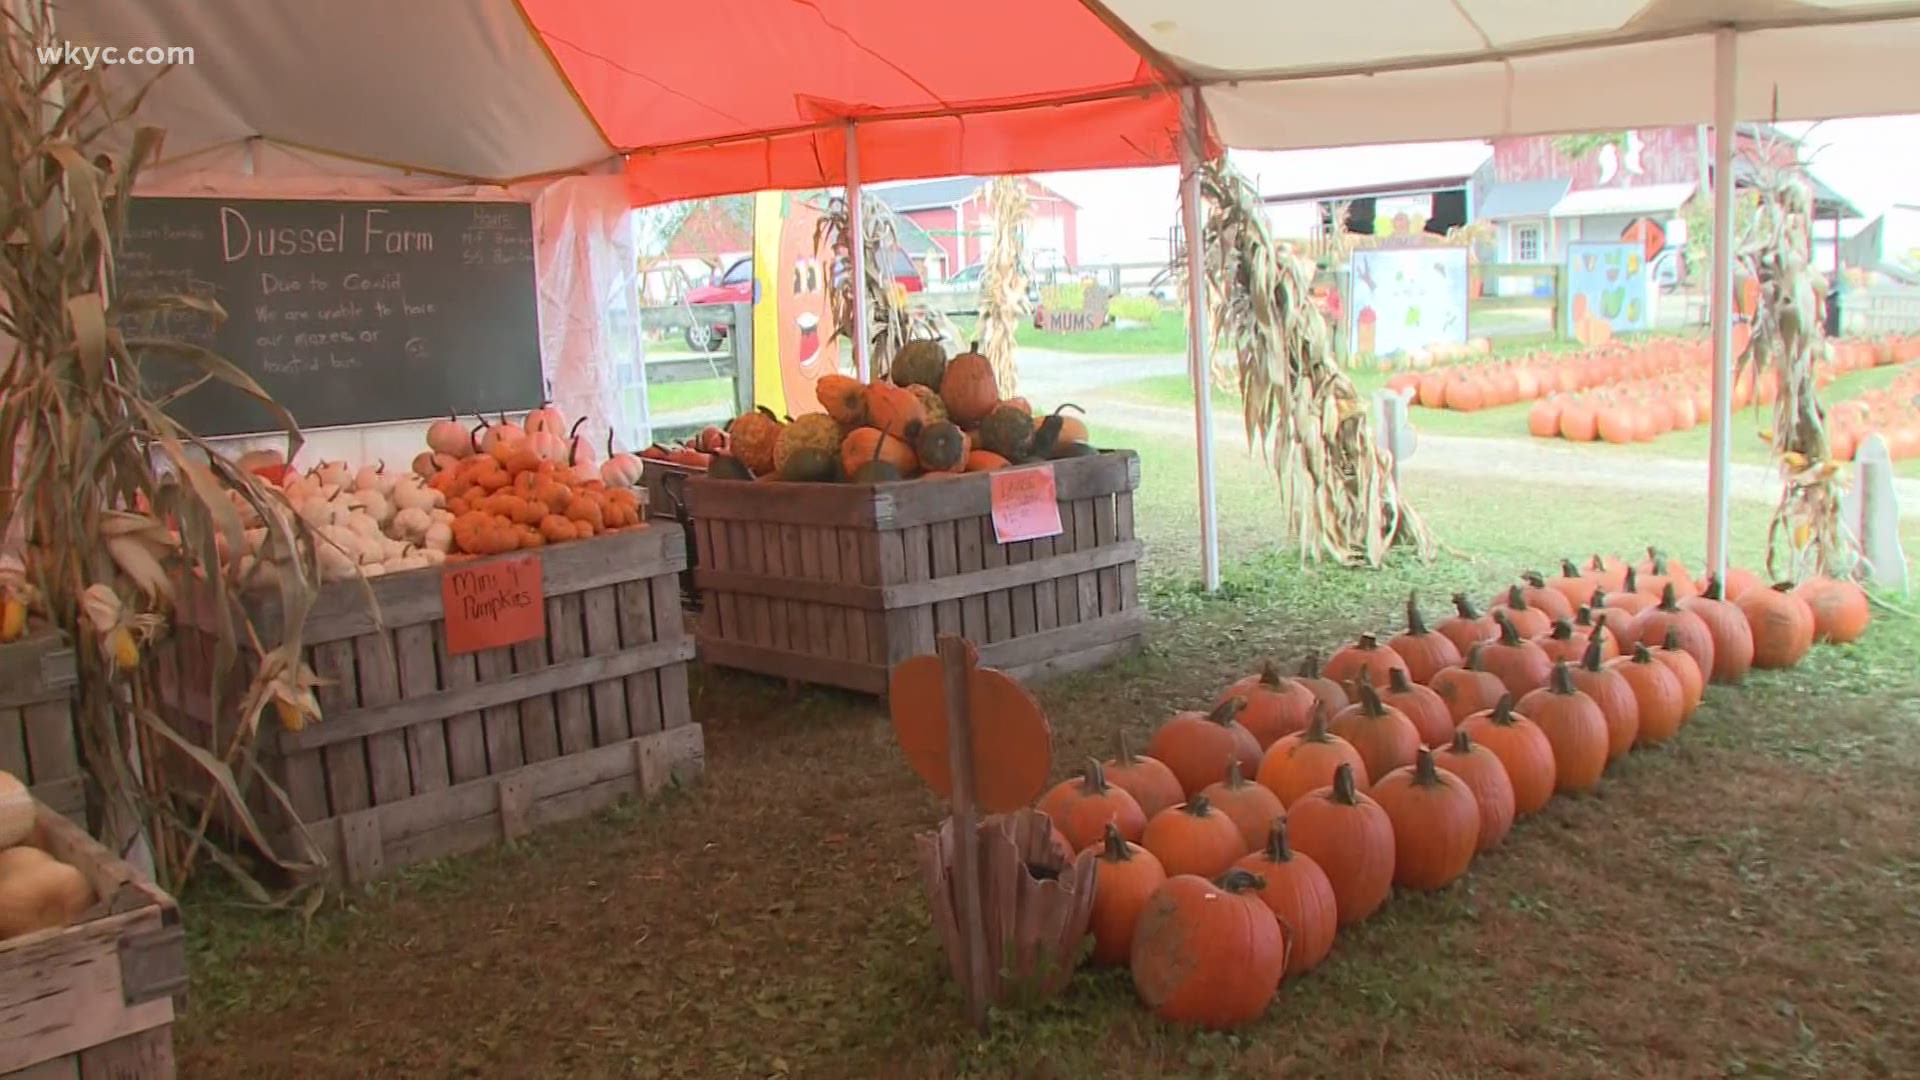 Oct. 4, 2020: Looking for some fall fun this year? Here's a look at everything you can expect to find this year at Dussel Farm in Kent. Happy Halloween!